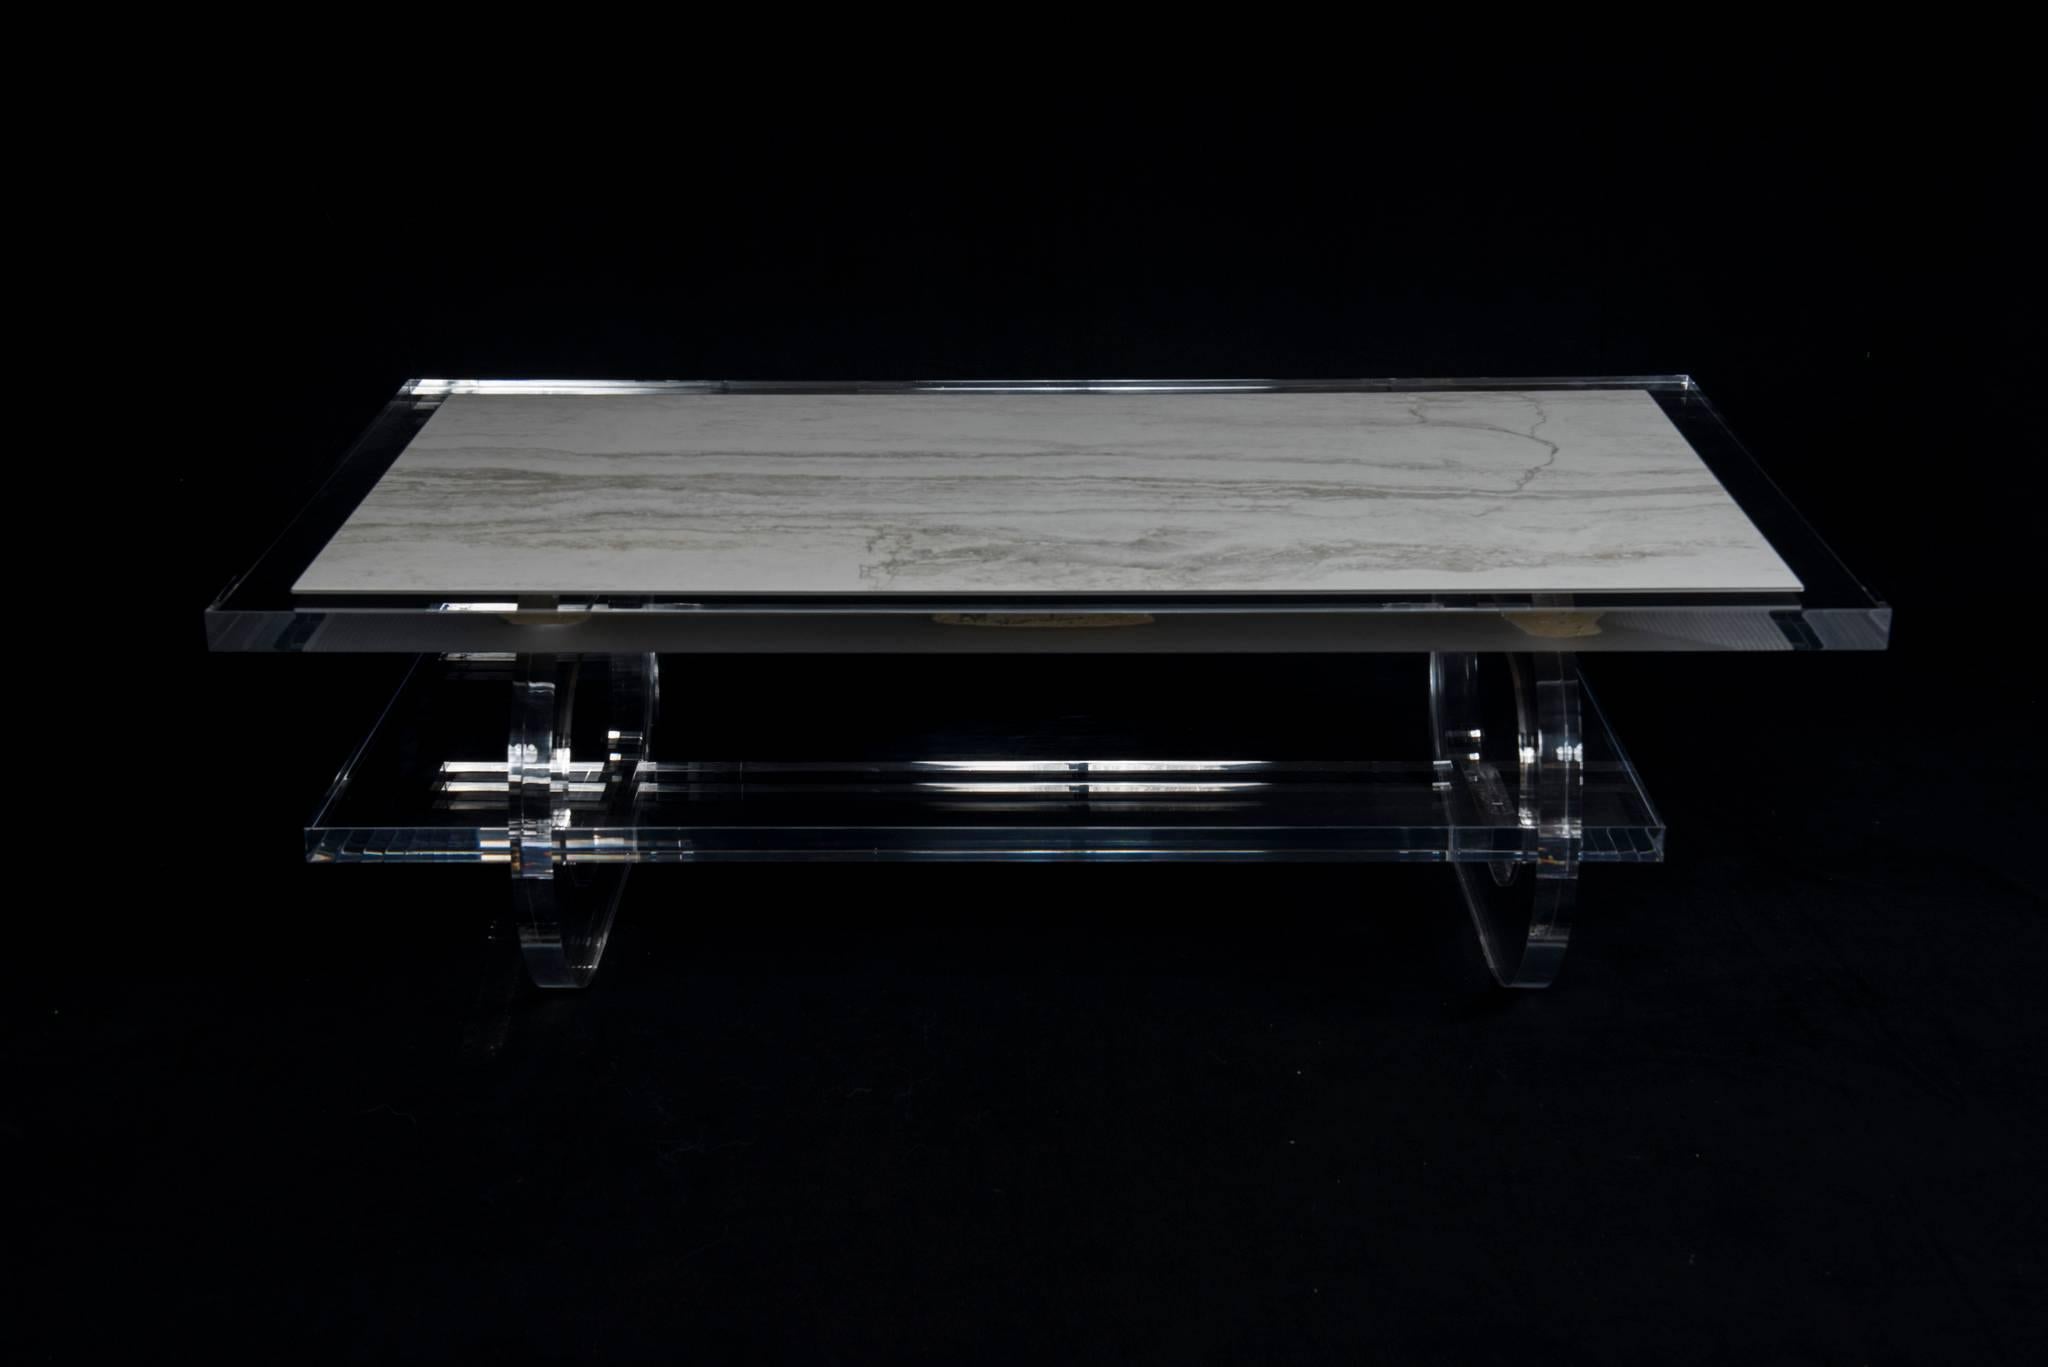 An original G. Ramos newly produced two-tiered Lucite cocktail table with oval racetrack legs. This table features thick Lucite slabbing and a Carrara marble inset top.